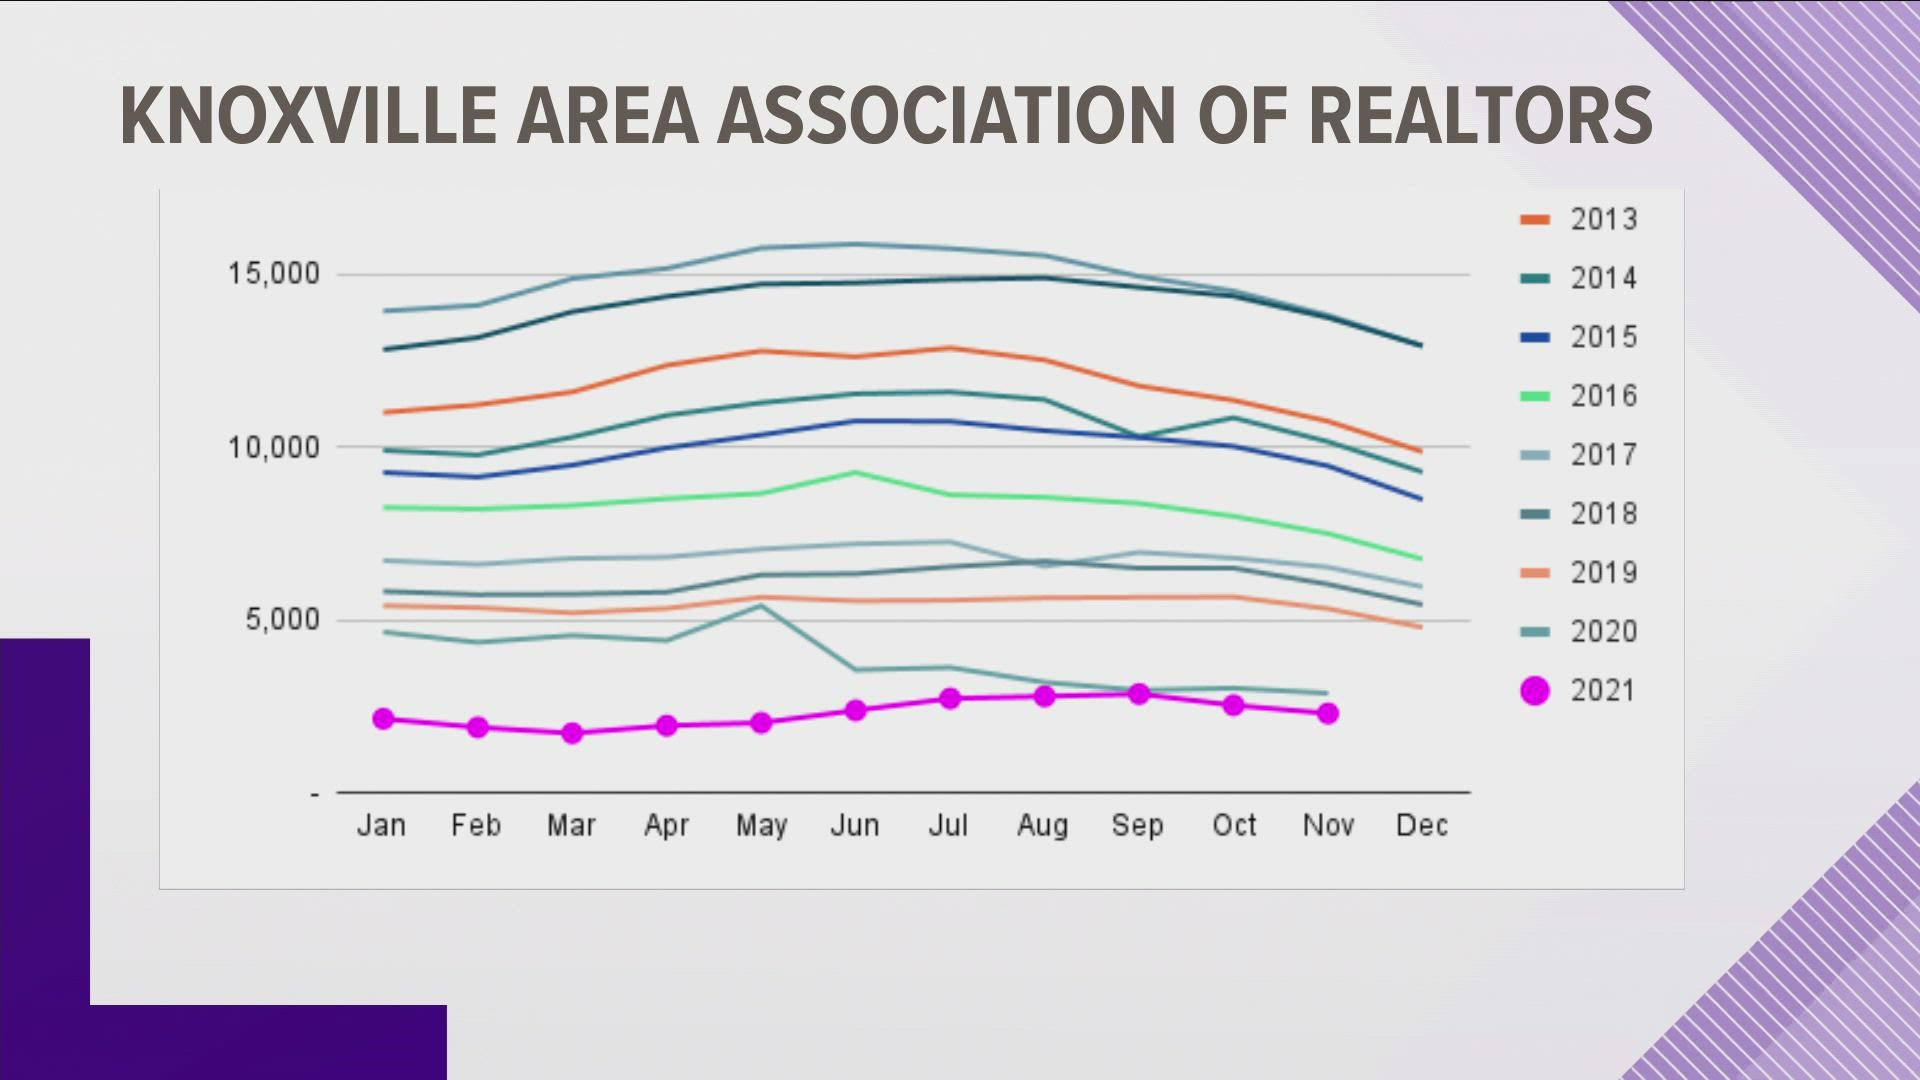 November data from the Knoxville Area Association of Realtors shows sales and active listings were down in November 2021, but less than the normal seasonal dip.